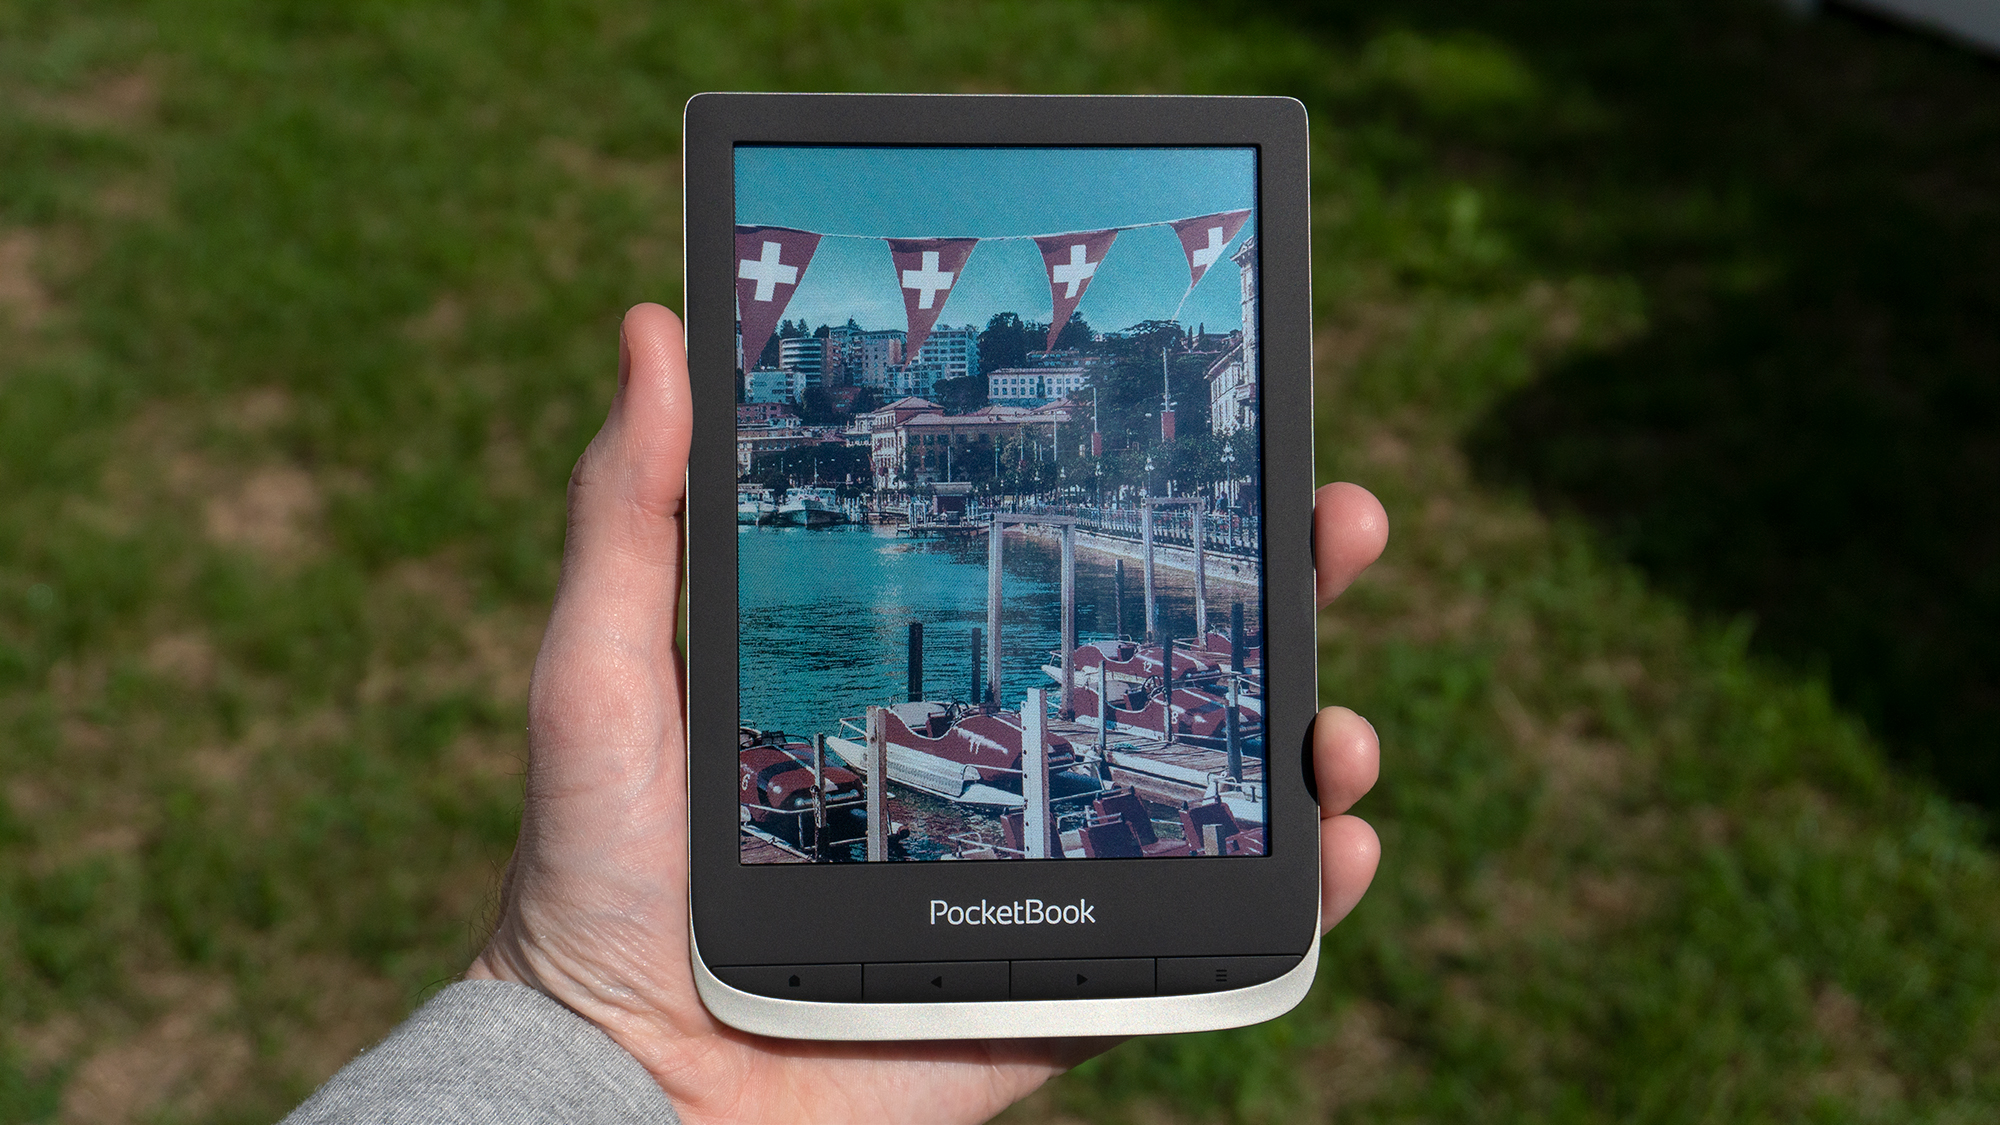 The PocketBook Colour's E Ink Kaleido screen looks best under bright lighting, with colours looking particularly bold and saturated in bright sunlight. (Photo: Andrew Liszewski/Gizmodo)